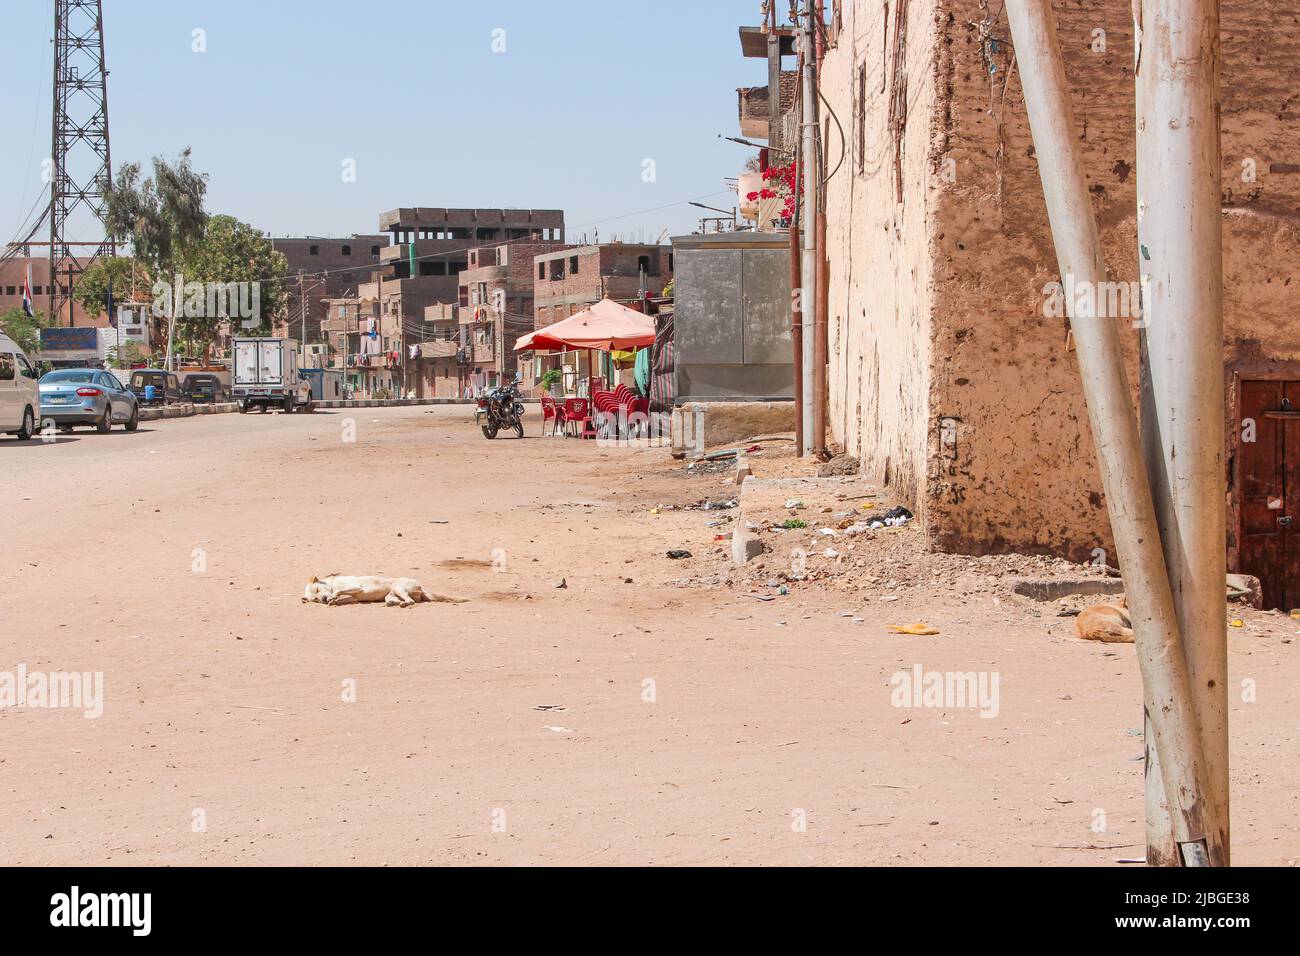 Downtown in Luxor, Egypt. Image of the dog who is relaxed and sleeping deeply in the middle of street. Stock Photo